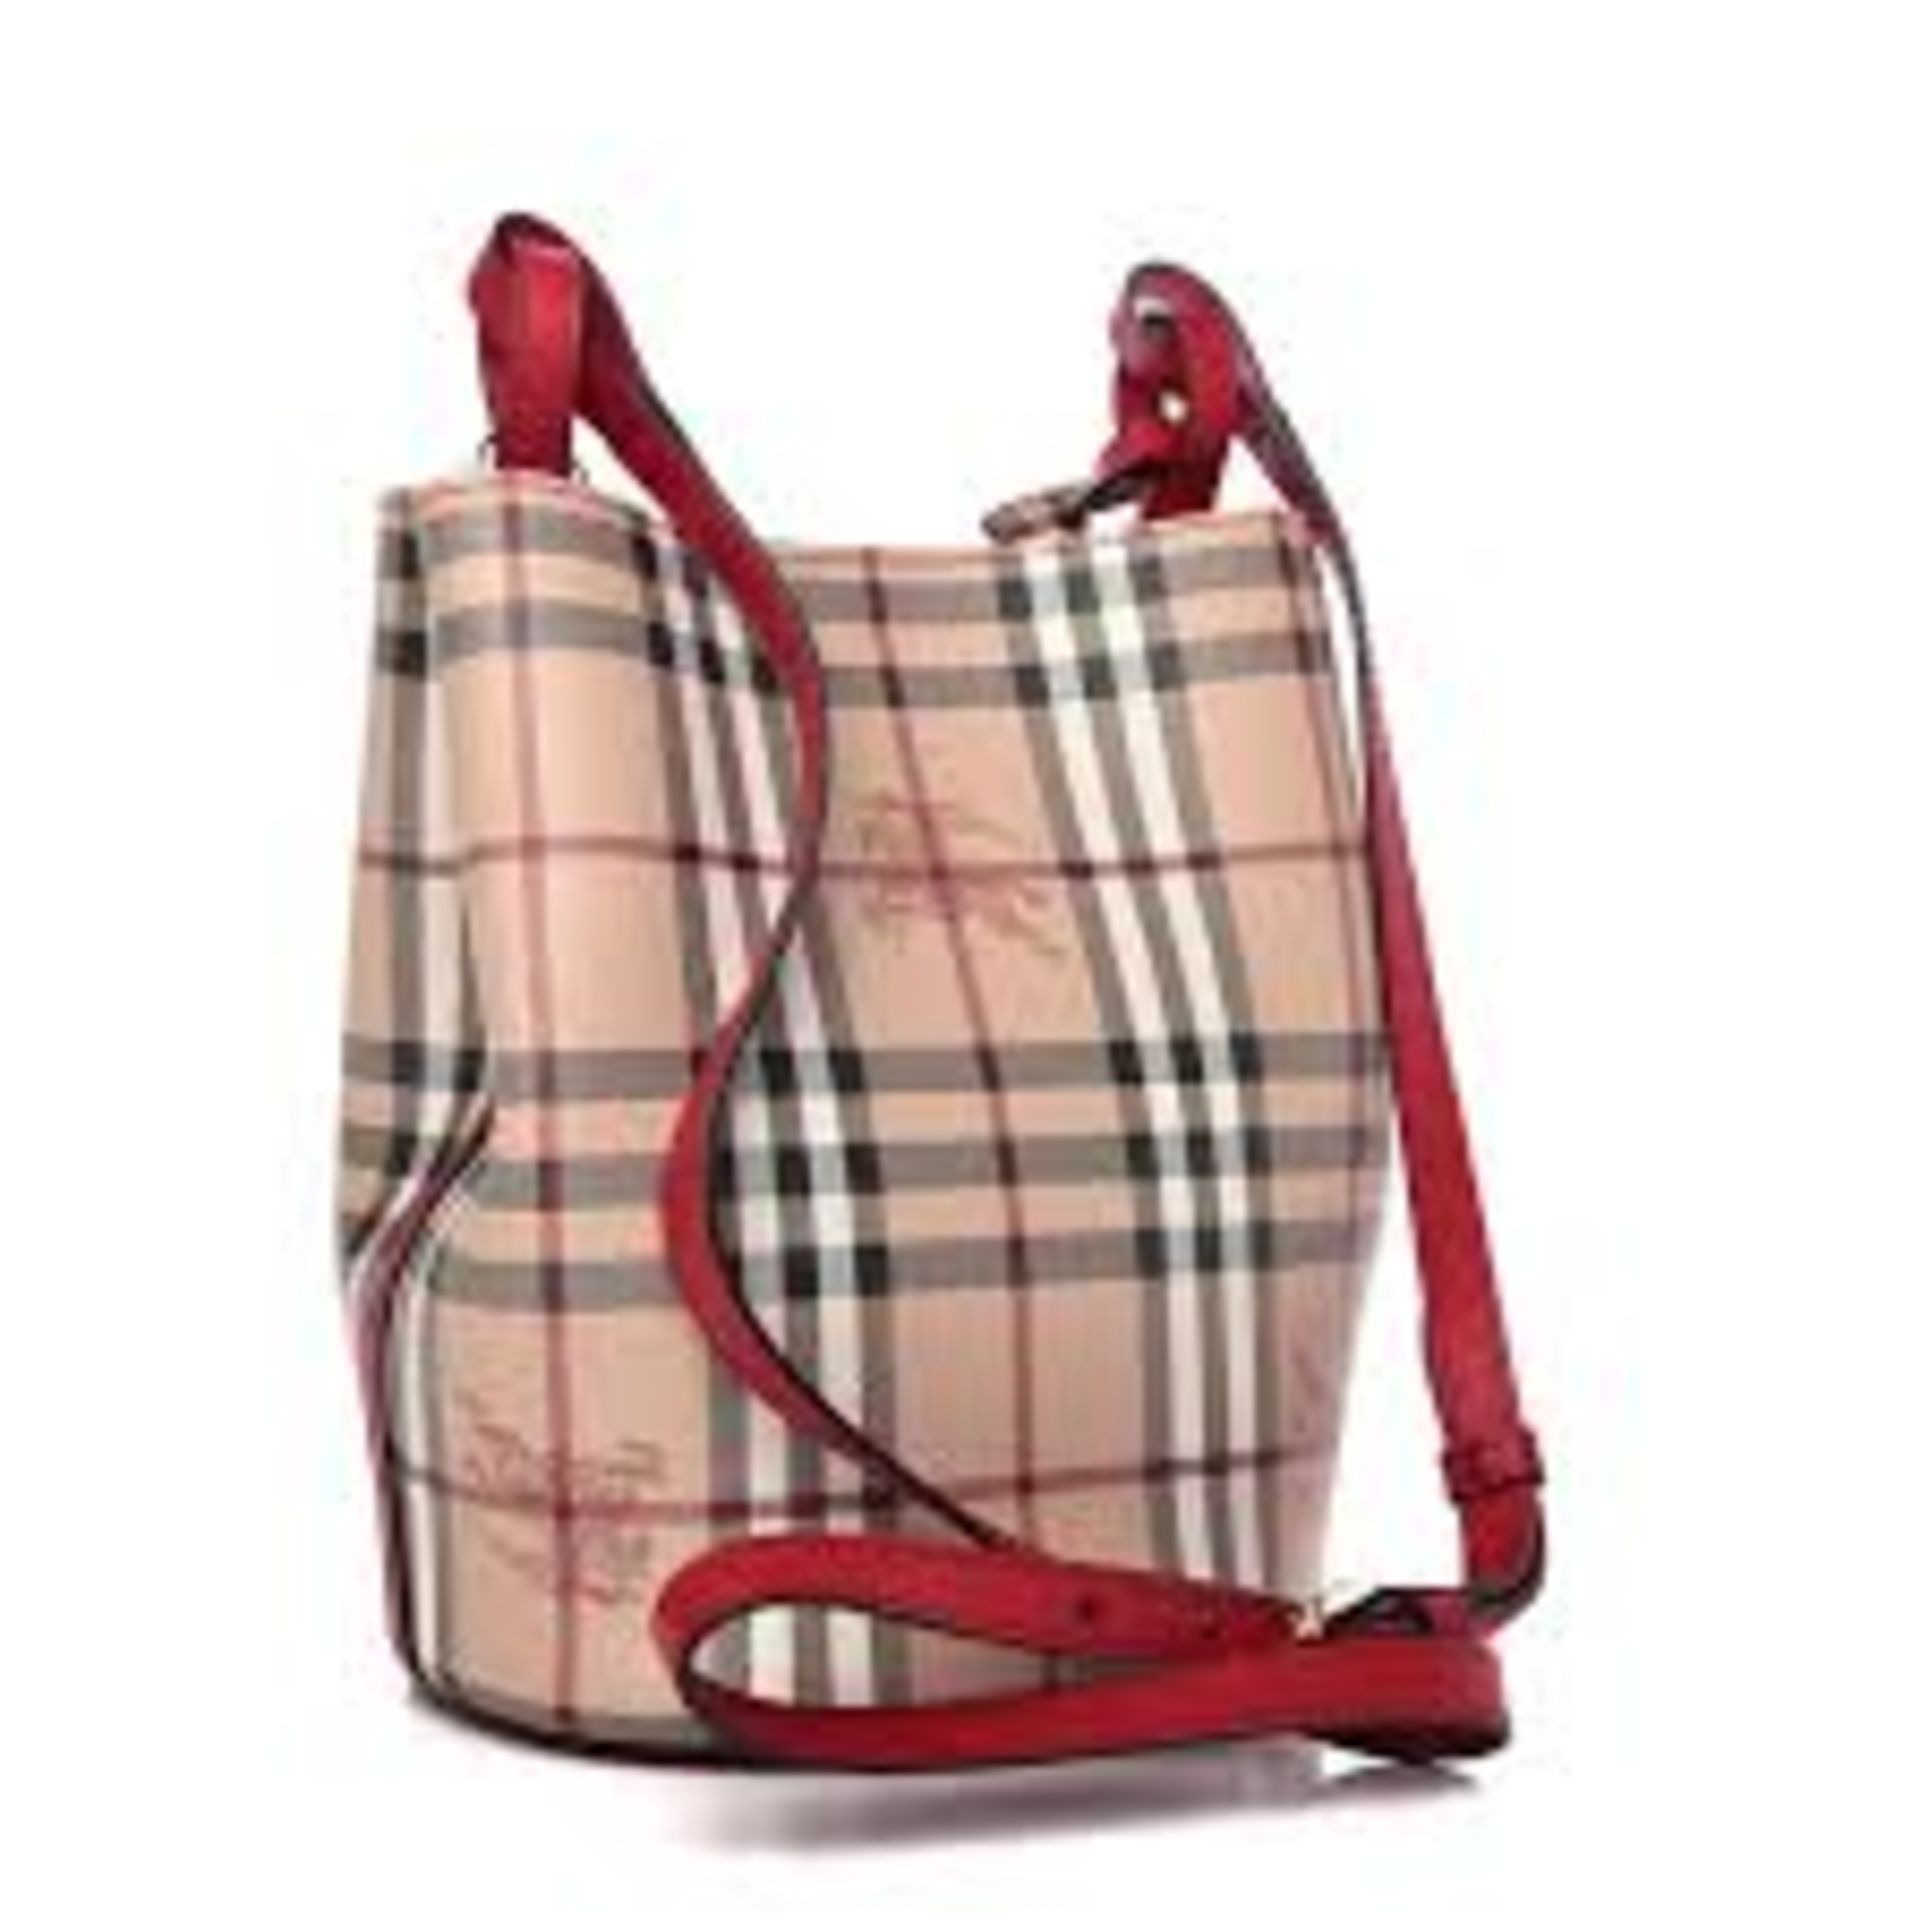 (No Vat) Burberry Leather And Haymarket Check Crossbody Bucket Bag Poppy Red approx 23x22cm. - Image 3 of 10